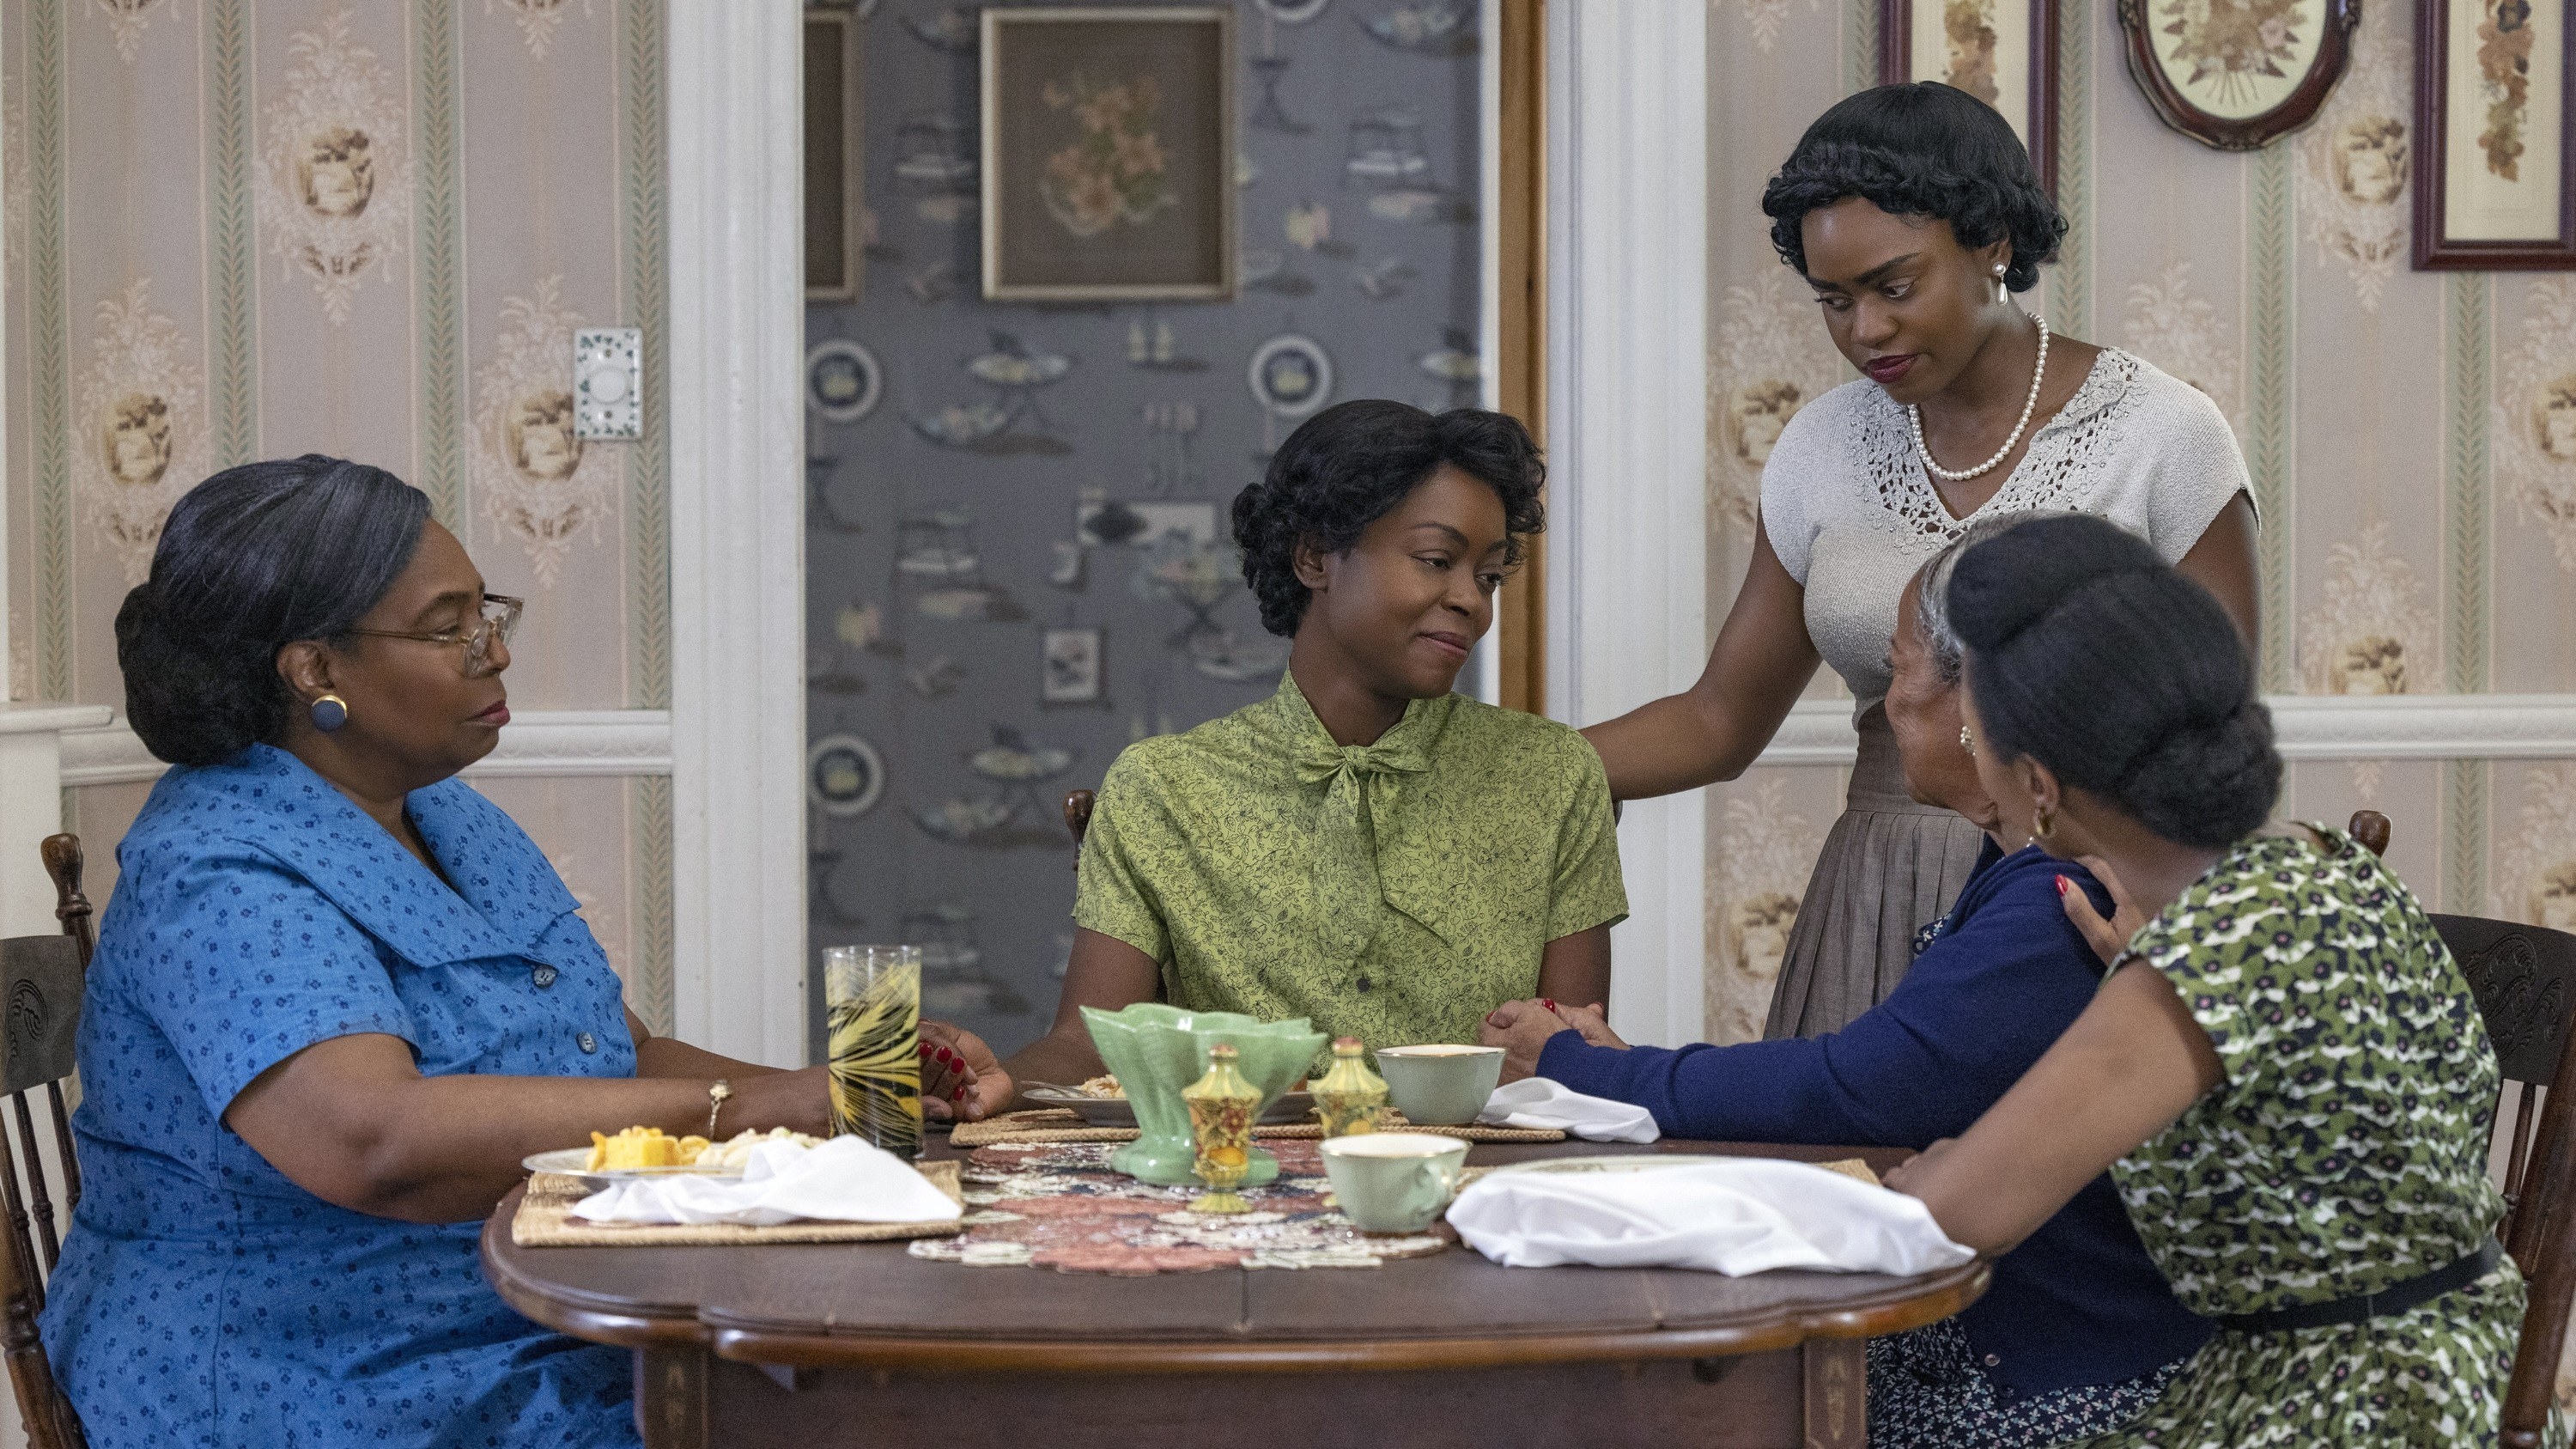 Whoopi sitting at the dinner table with other women in the film